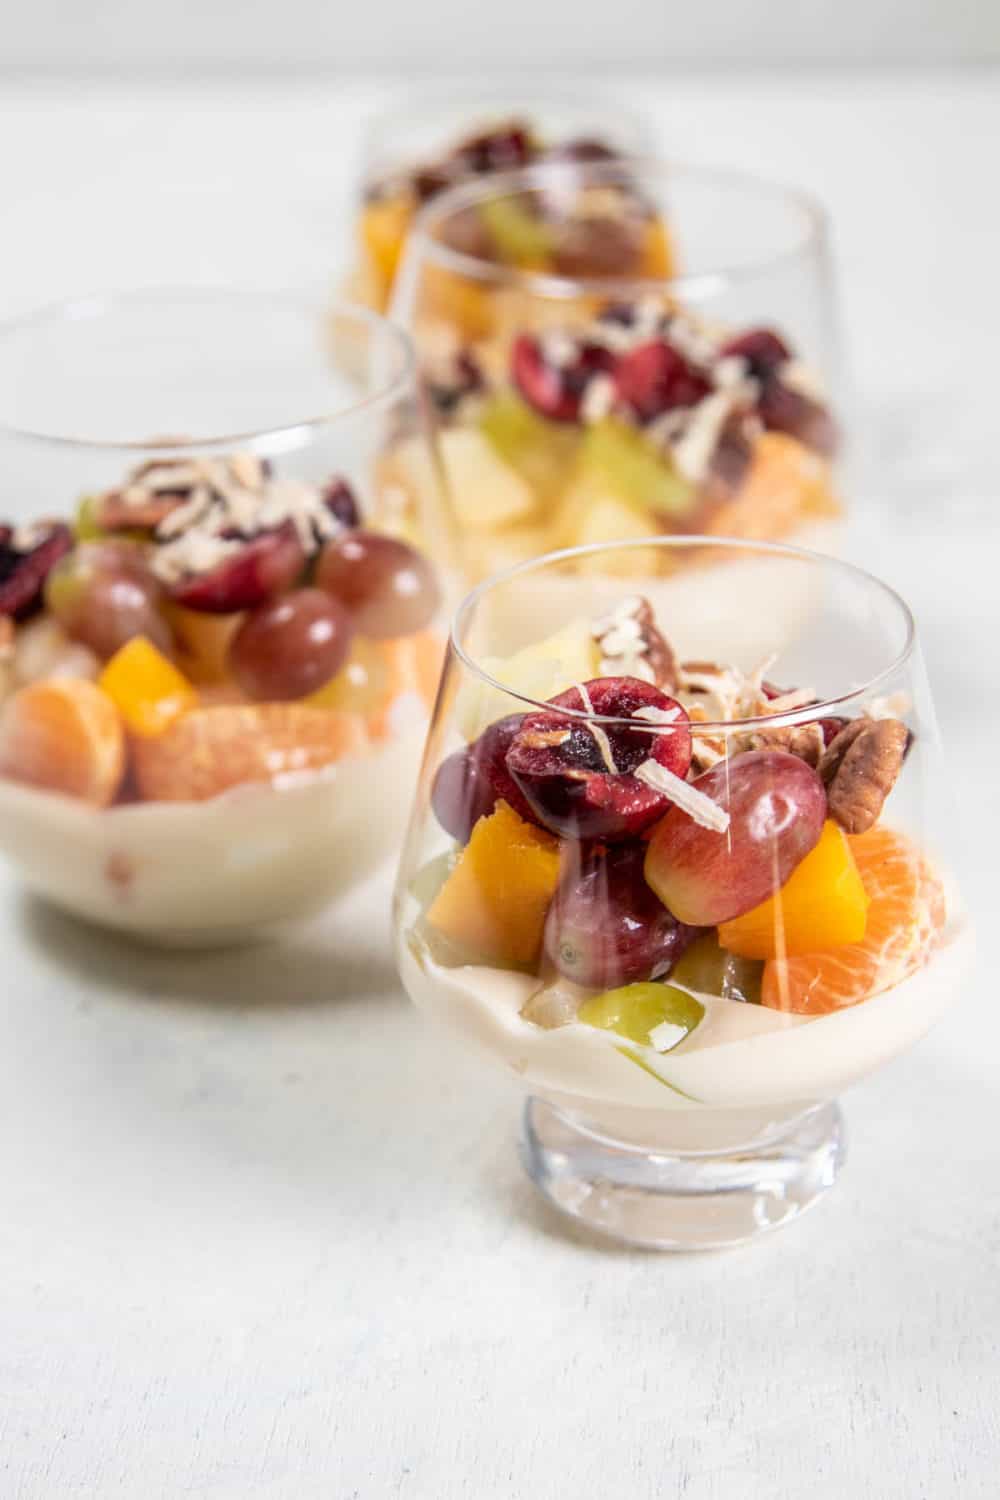 Four individual cups of layered Ambrosia Salad.